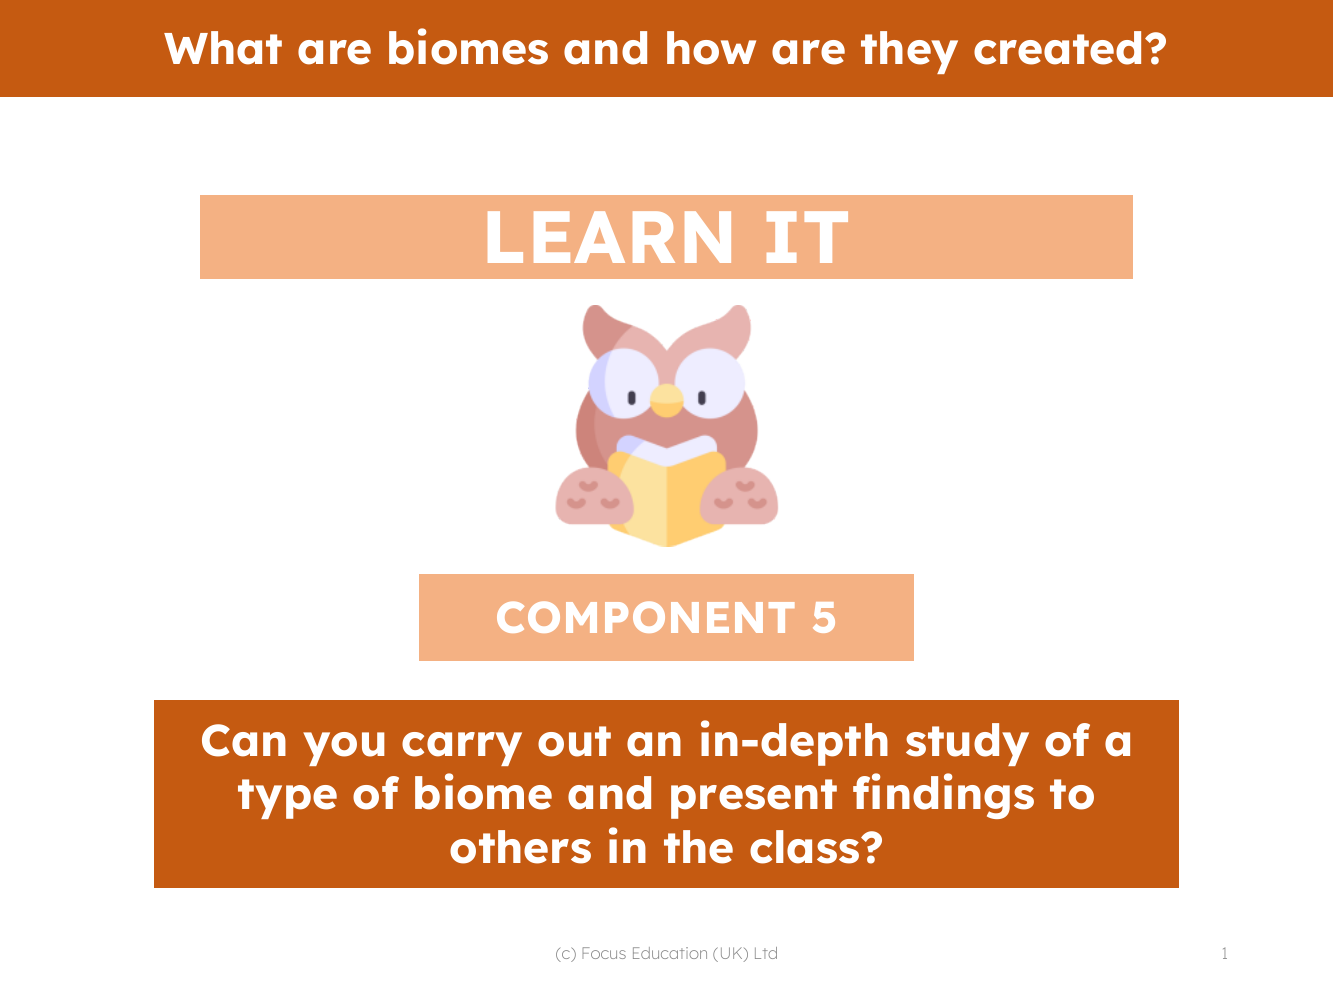 Can you carry out an in-depth study of a type of biome and present findings to others in the class? - Presentation